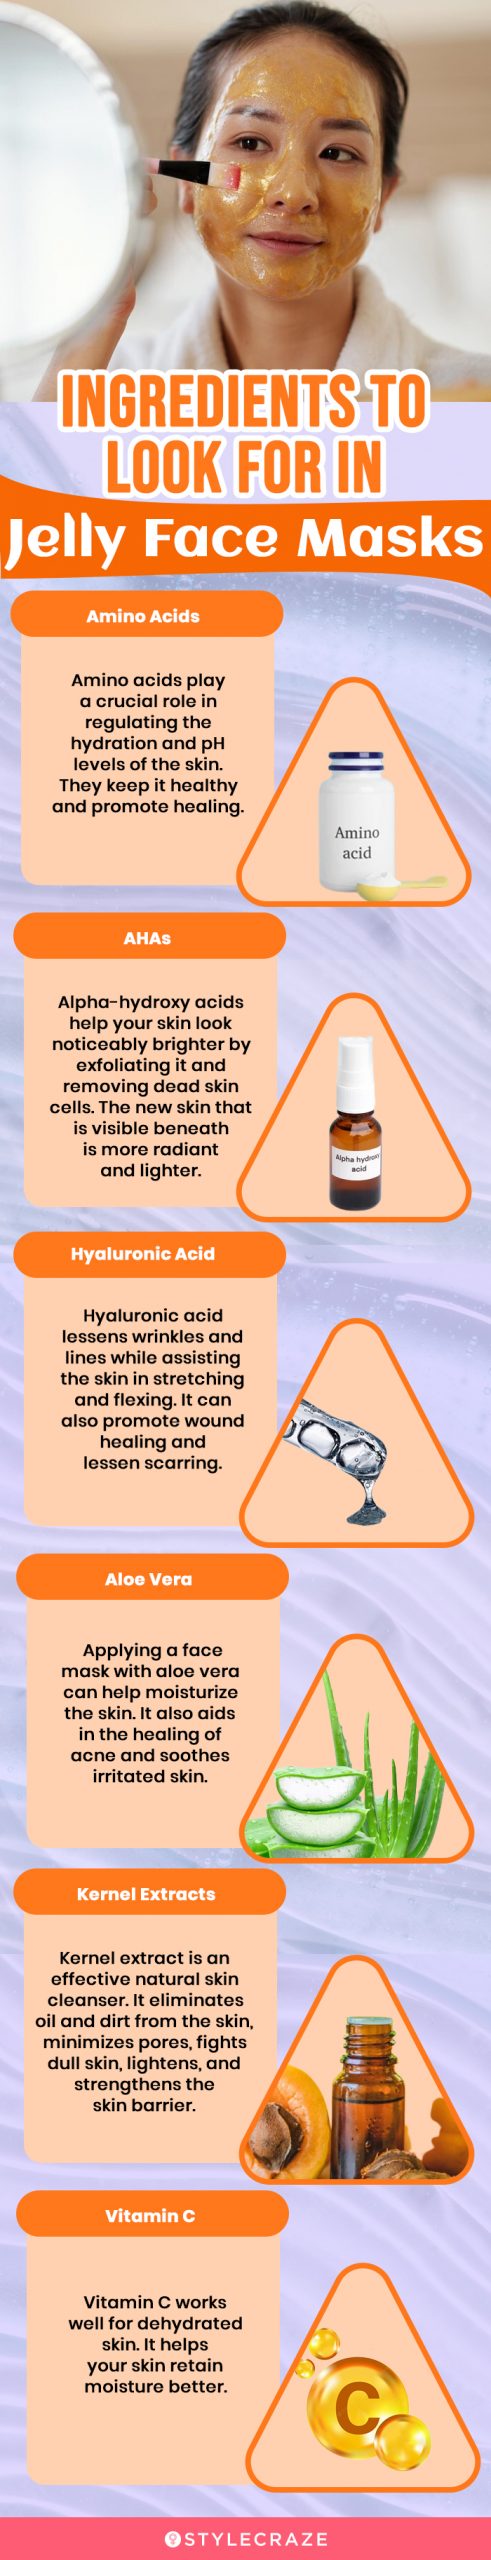 Ingredients To Look For In Jelly Face Masks (infographic)